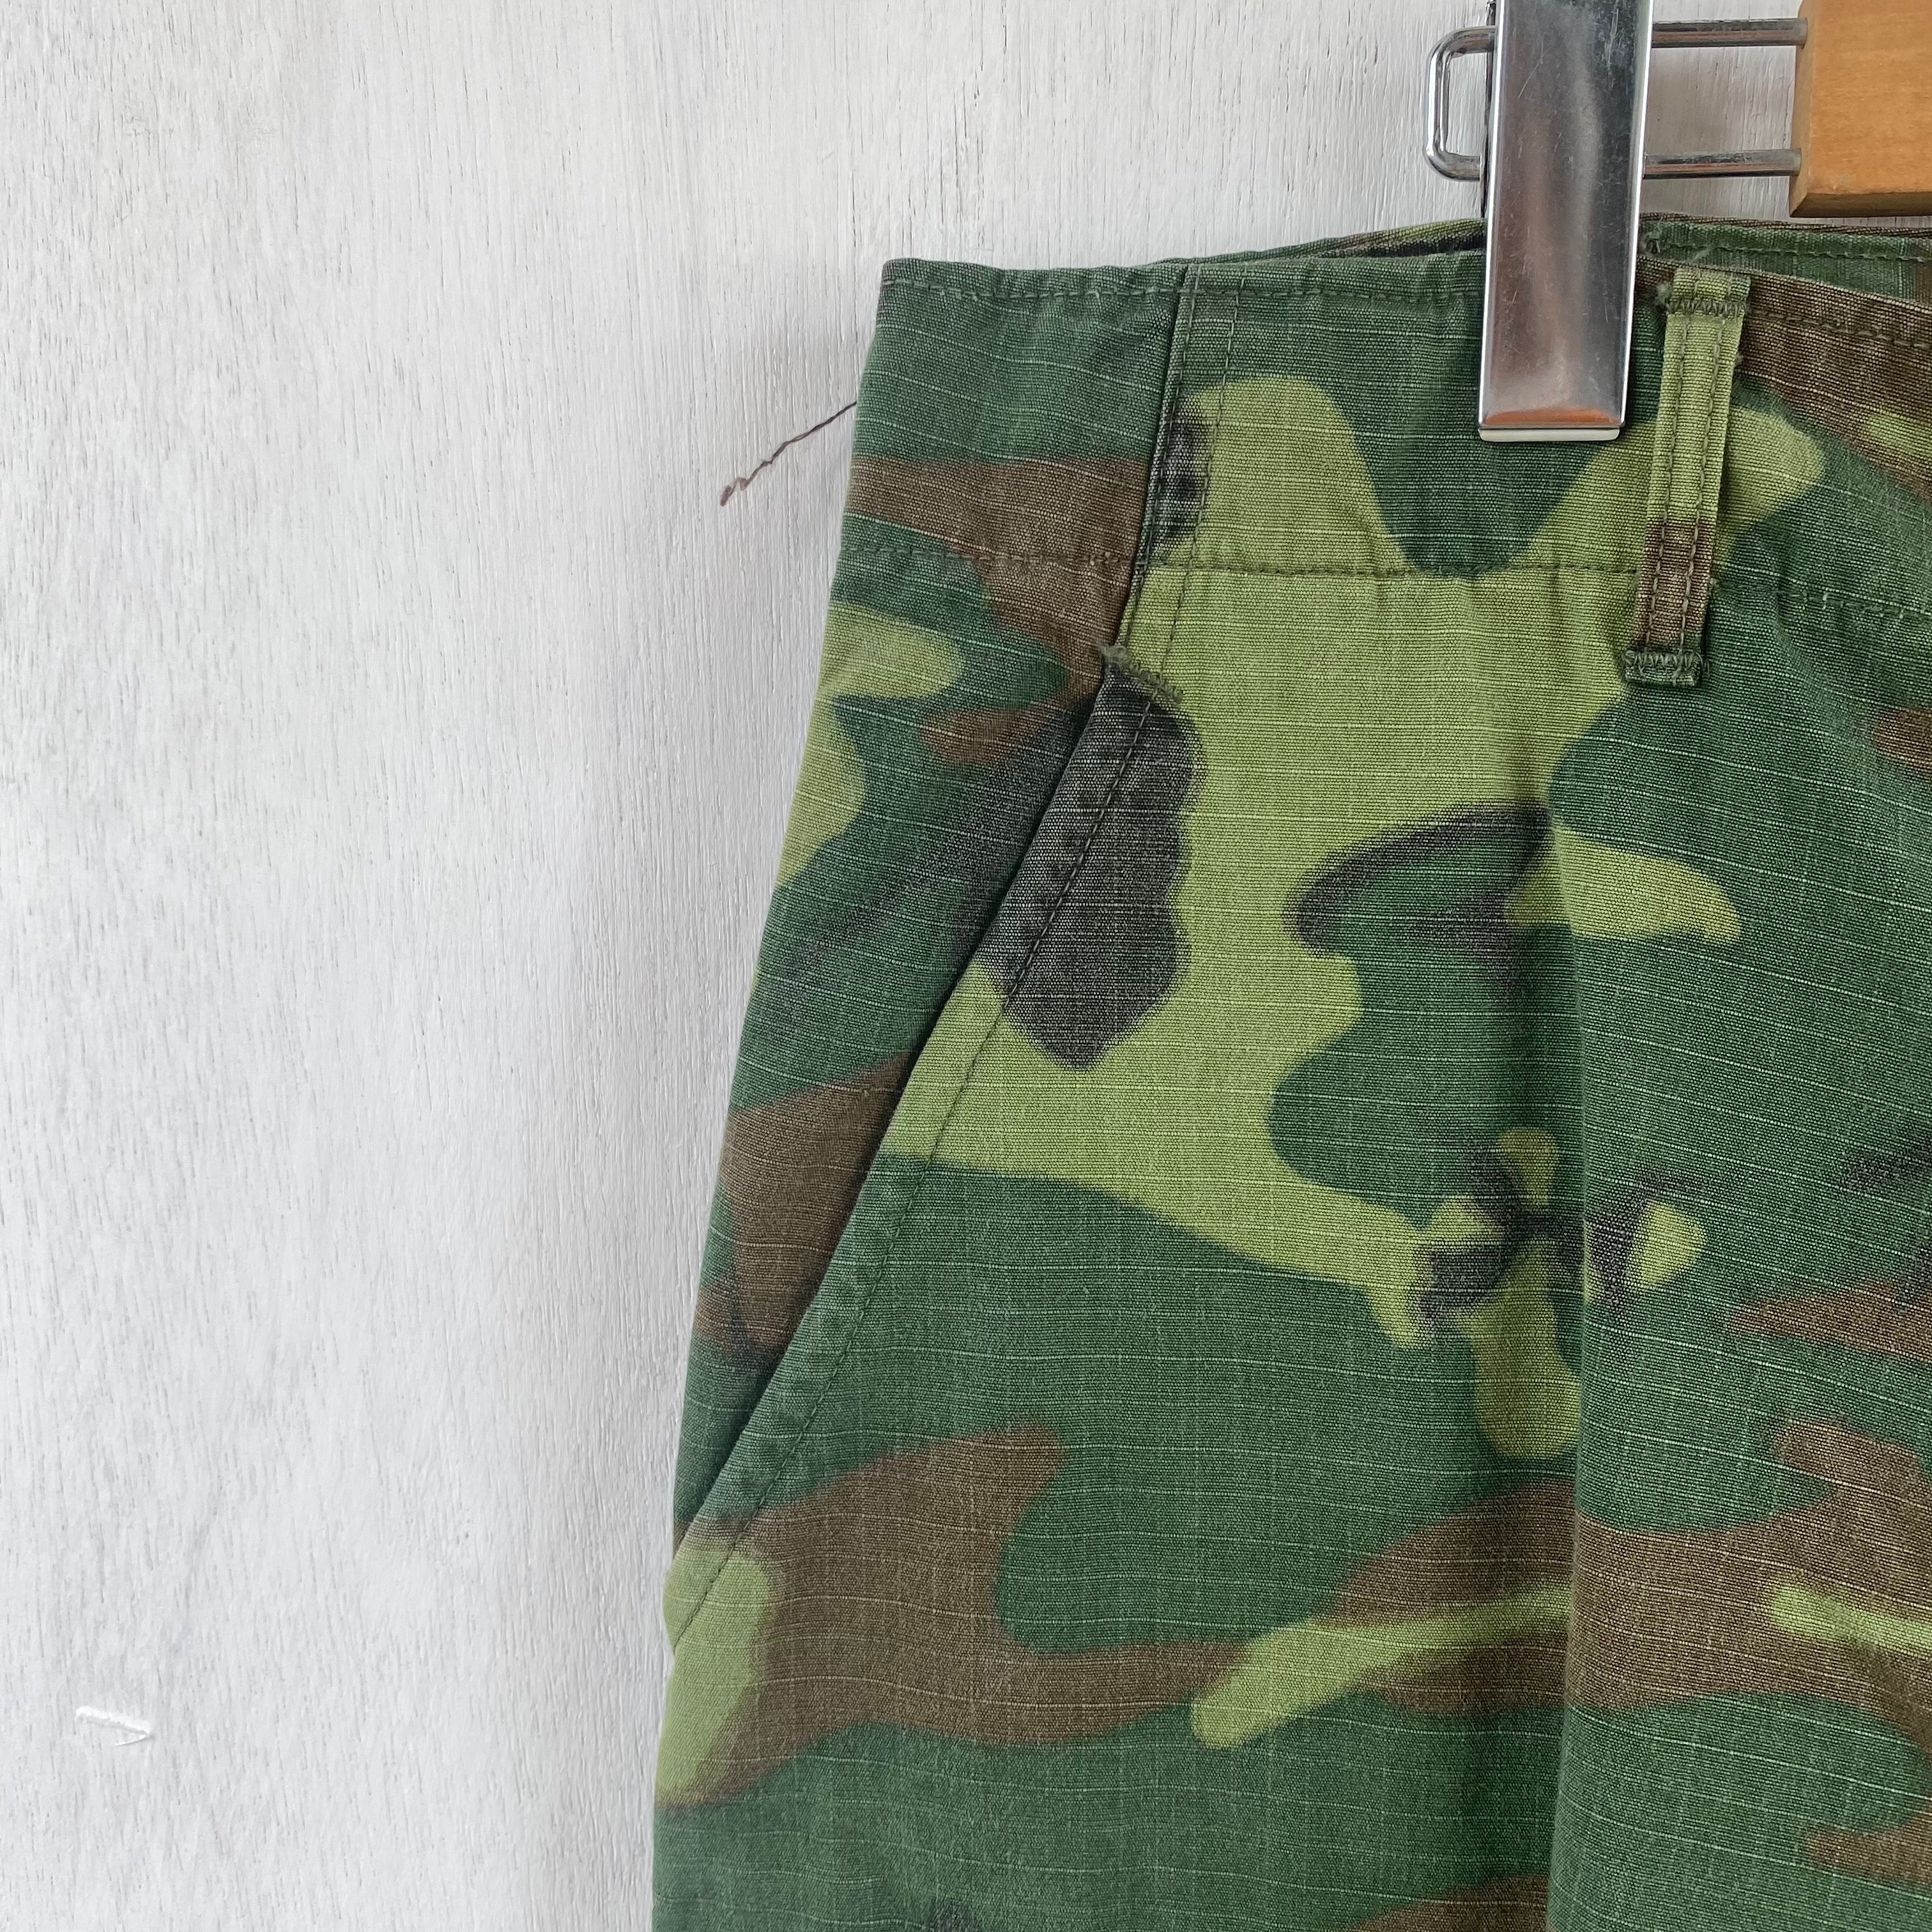 [ ONLY ONE ! ] US ARMED FORCES '68 JUNGLE FATIGUE TROUSERS / Mr.Clean Select